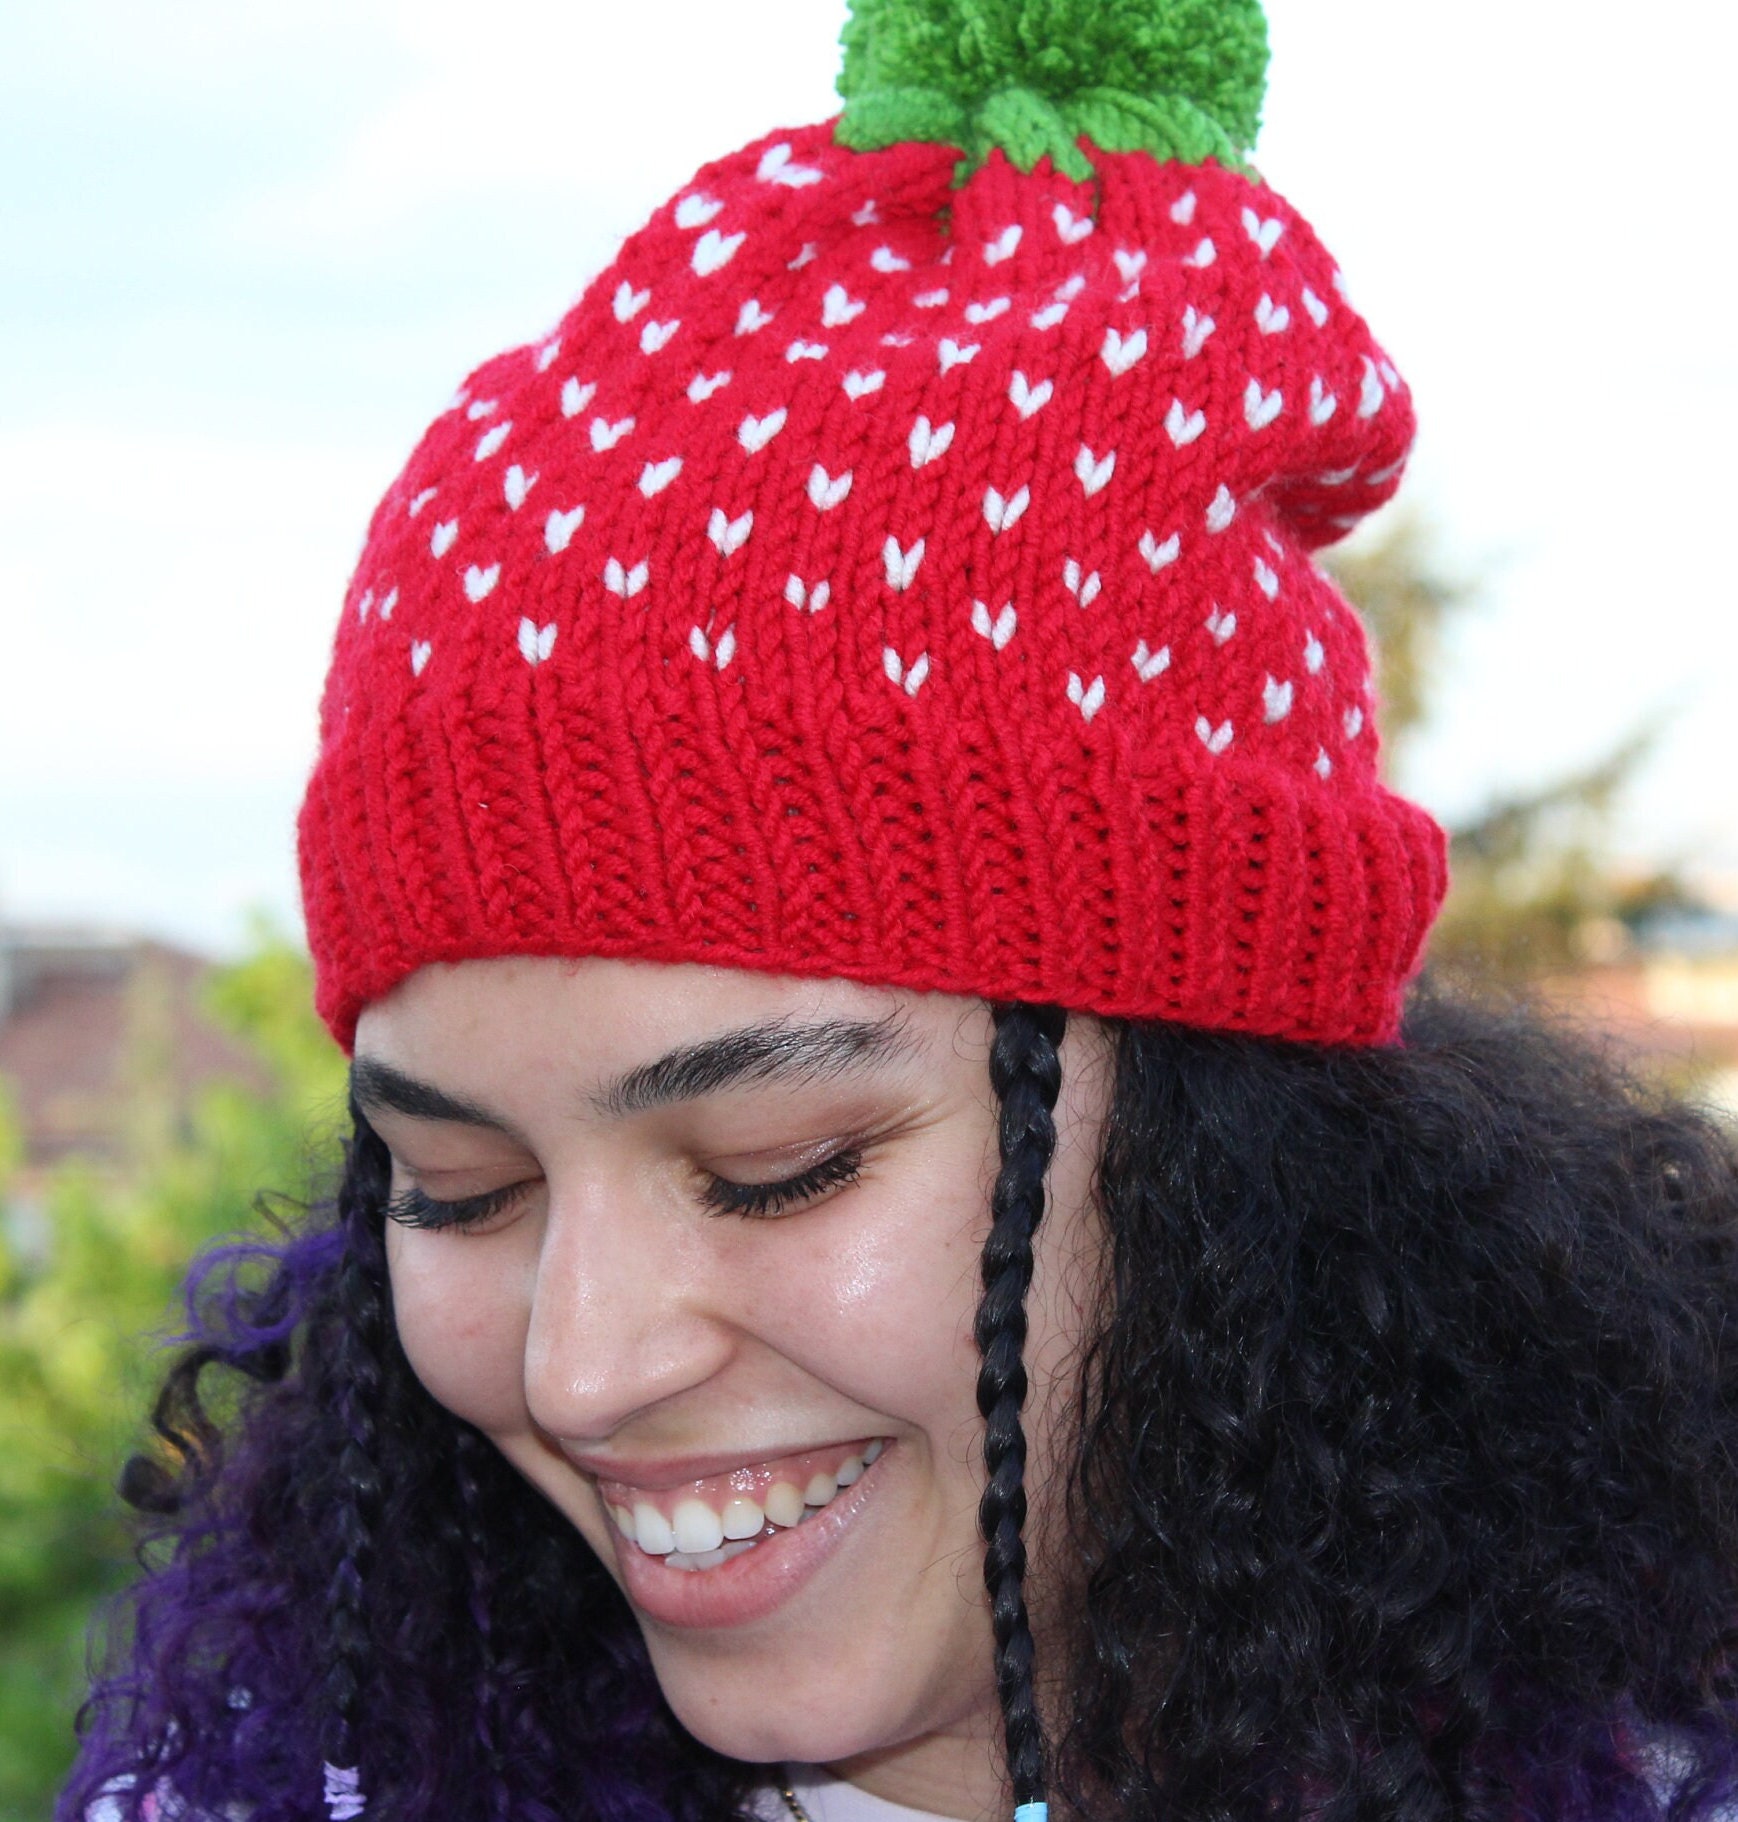 Minearbejder kompensation Klage Strawberry Beanie Colorful Accessories Handmade Knit - Etsy